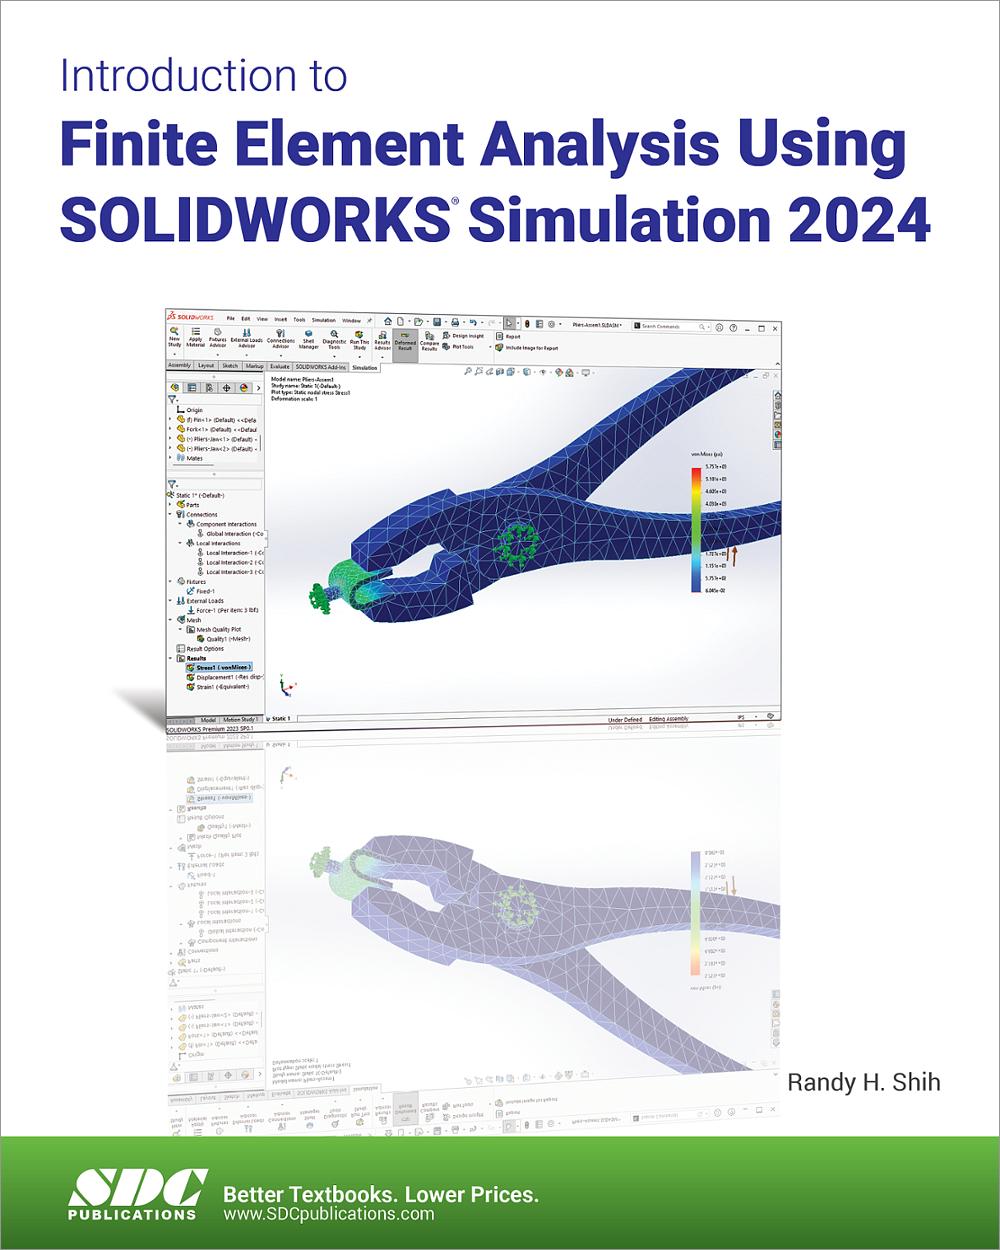 Introduction to Finite Element Analysis Using SOLIDWORKS Simulation